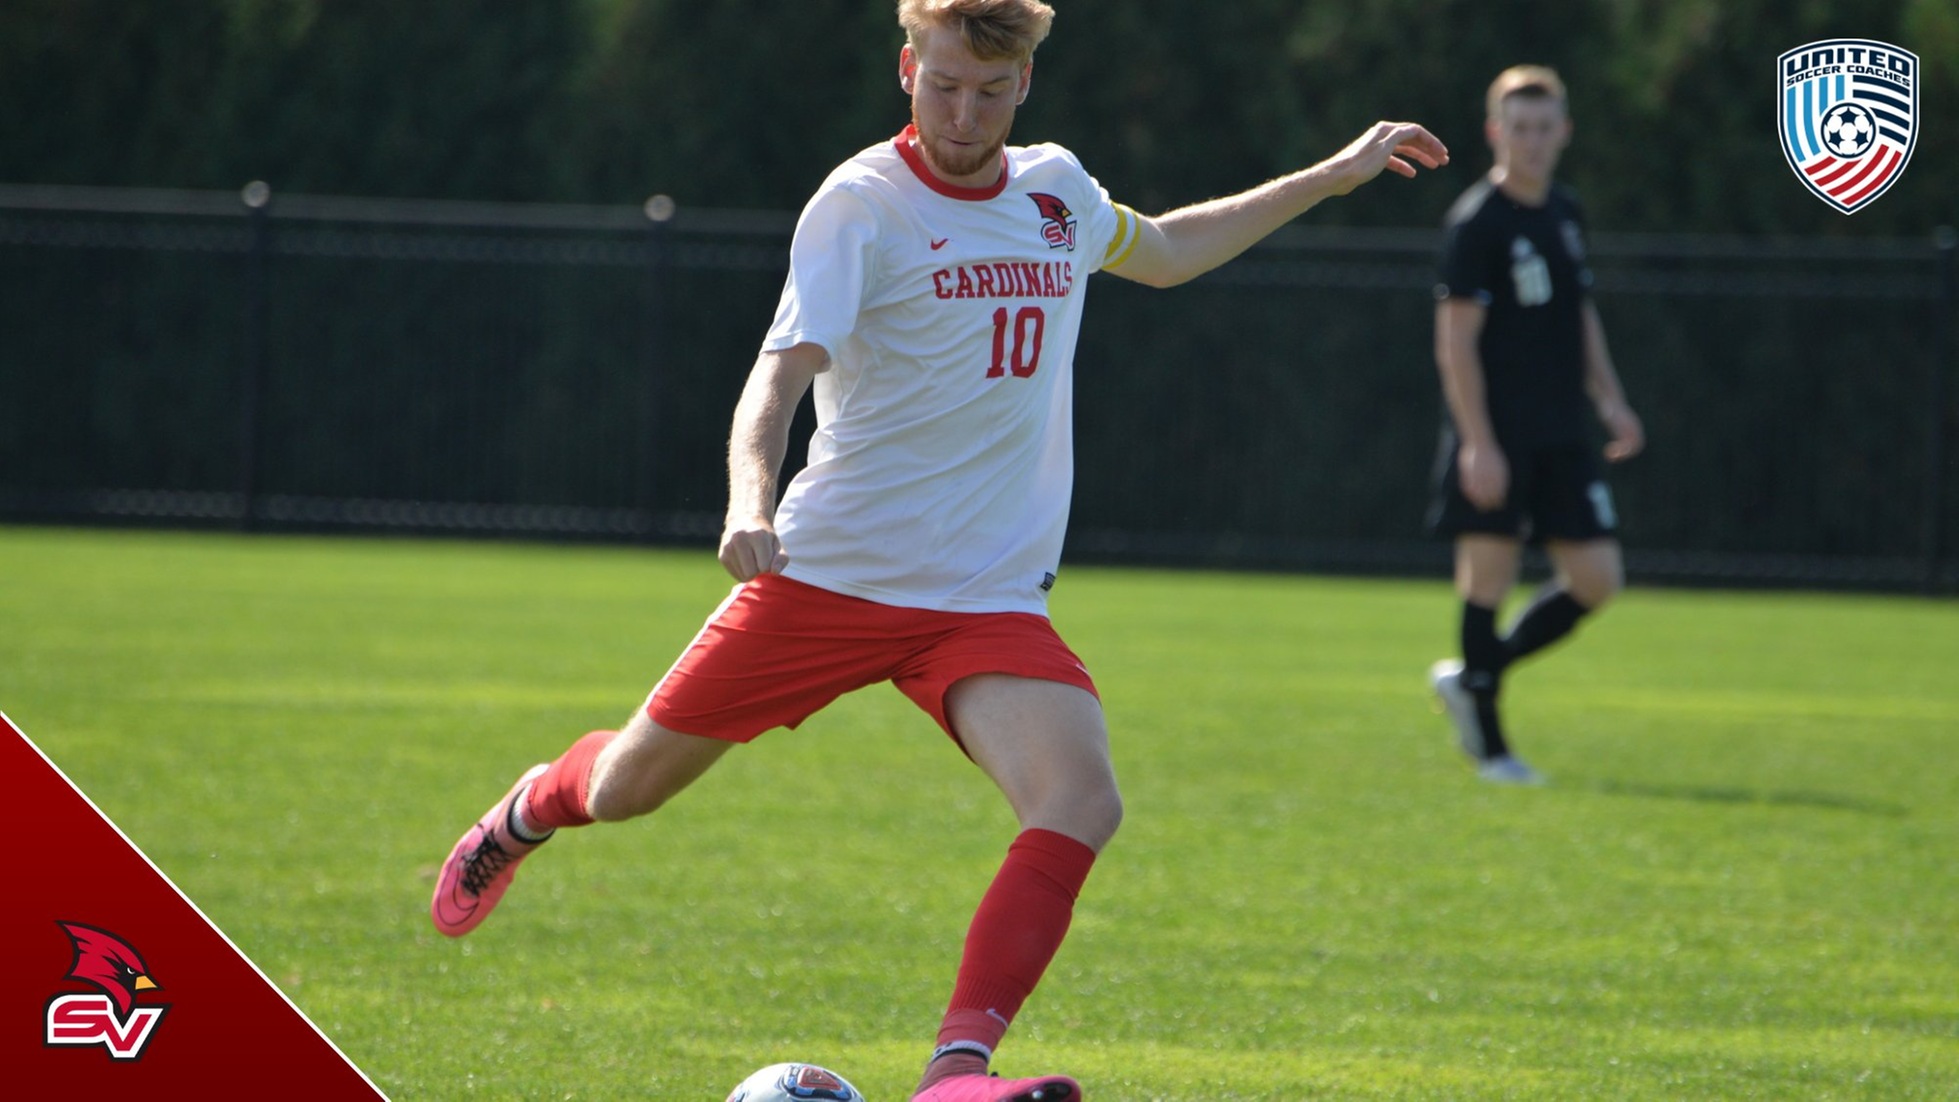 Connor Rutz named to United Soccer Coaches All-America Second Team